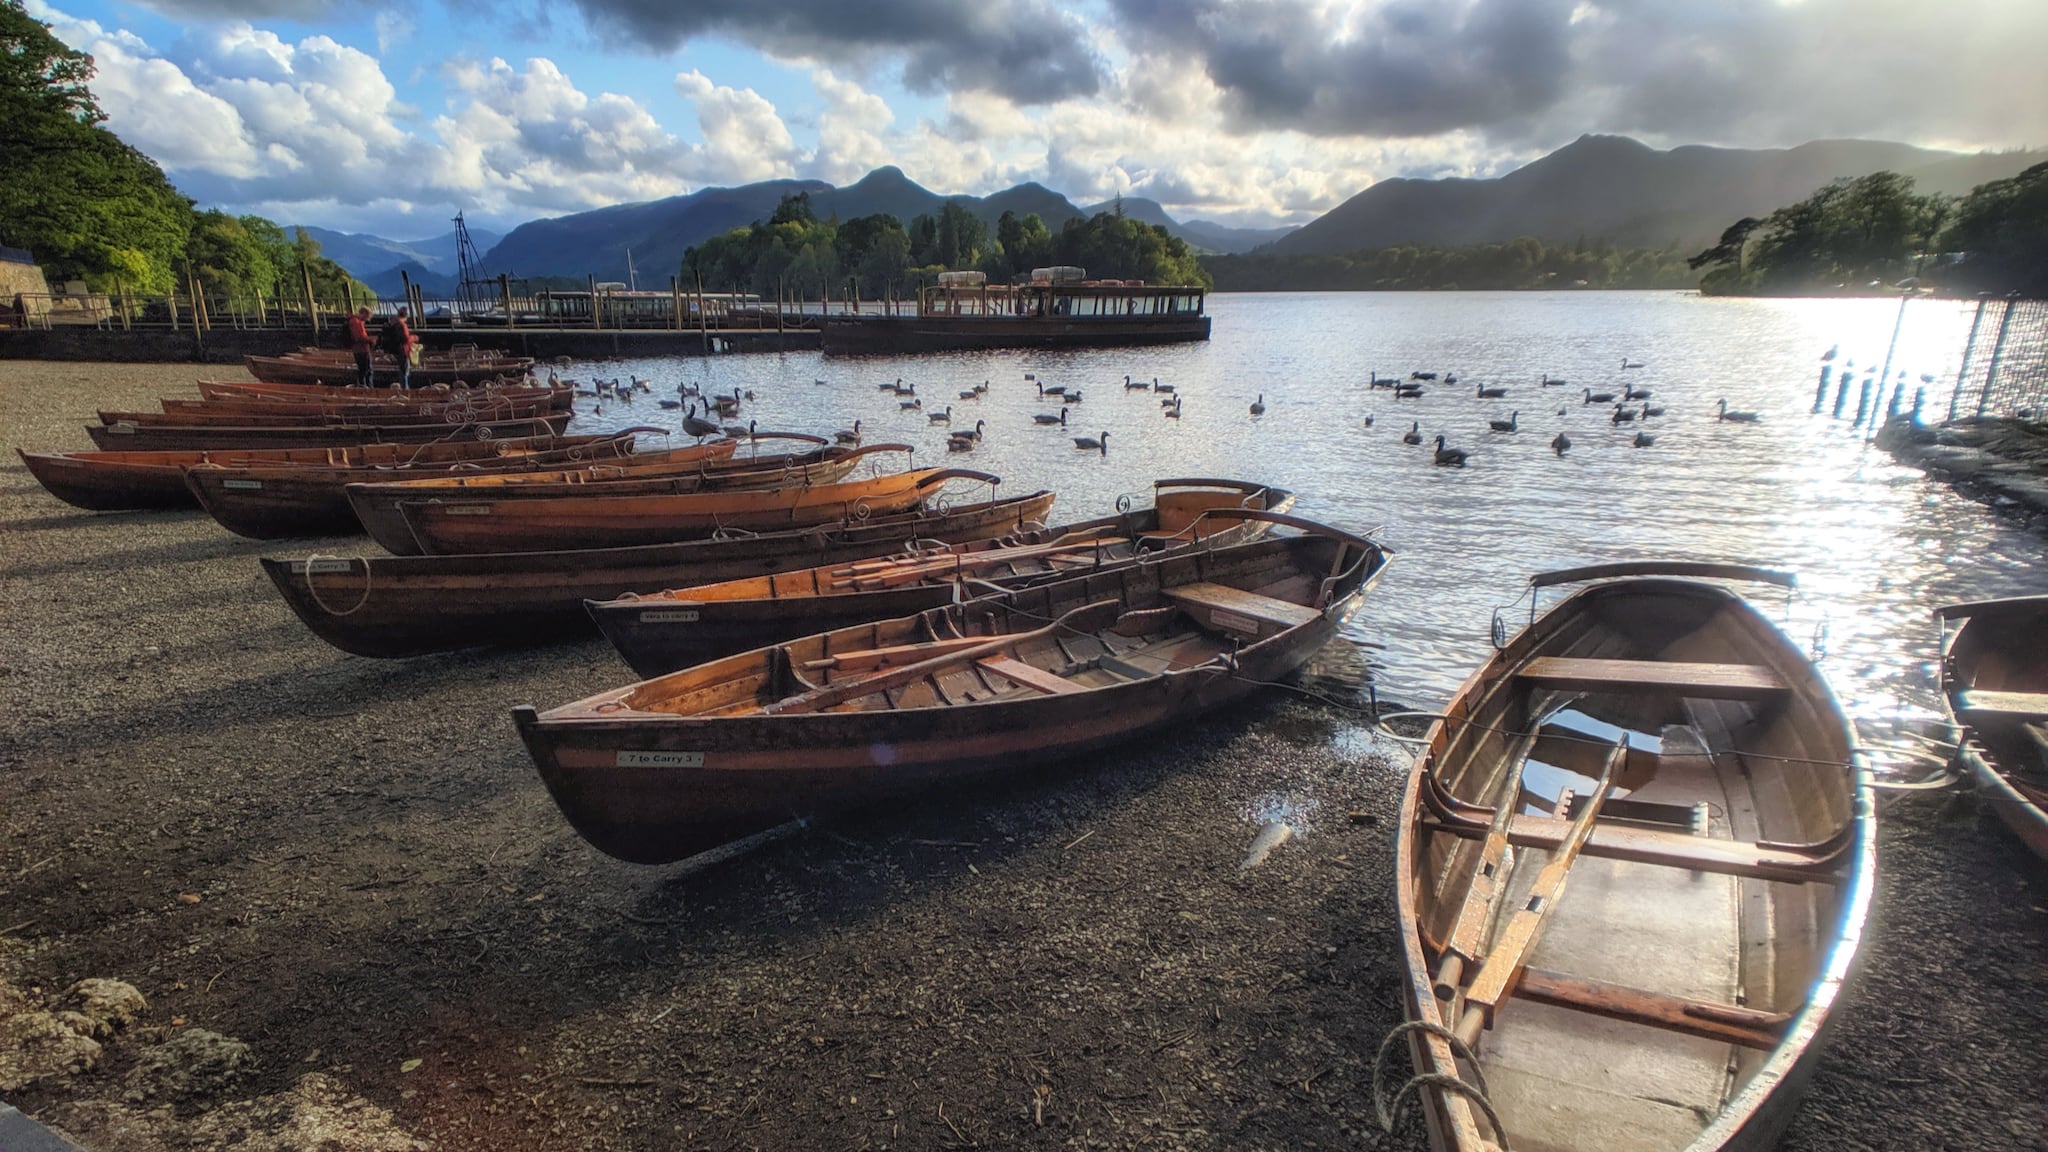 Visiting Derwentwater from Keswick